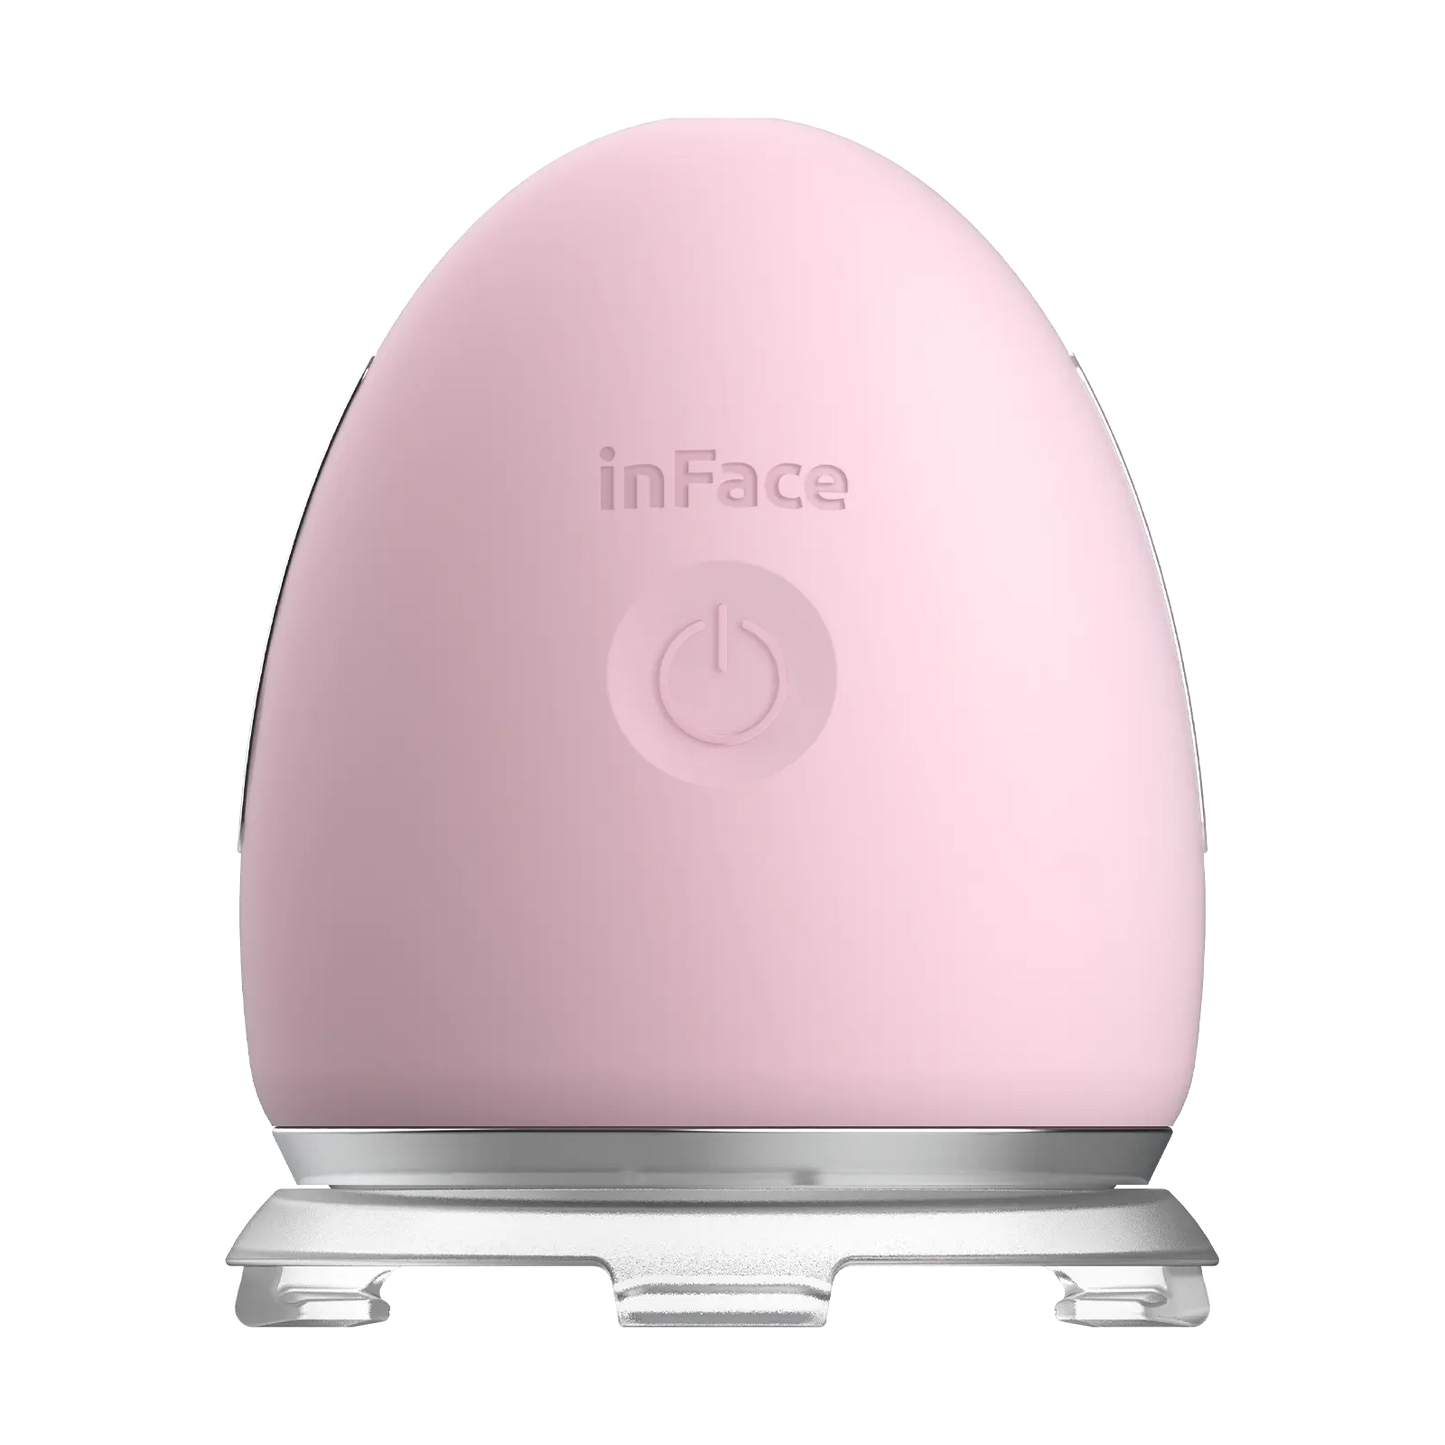 inFace Multifunctional Ion Facial Device od YouPin w SimplyBuy.pl